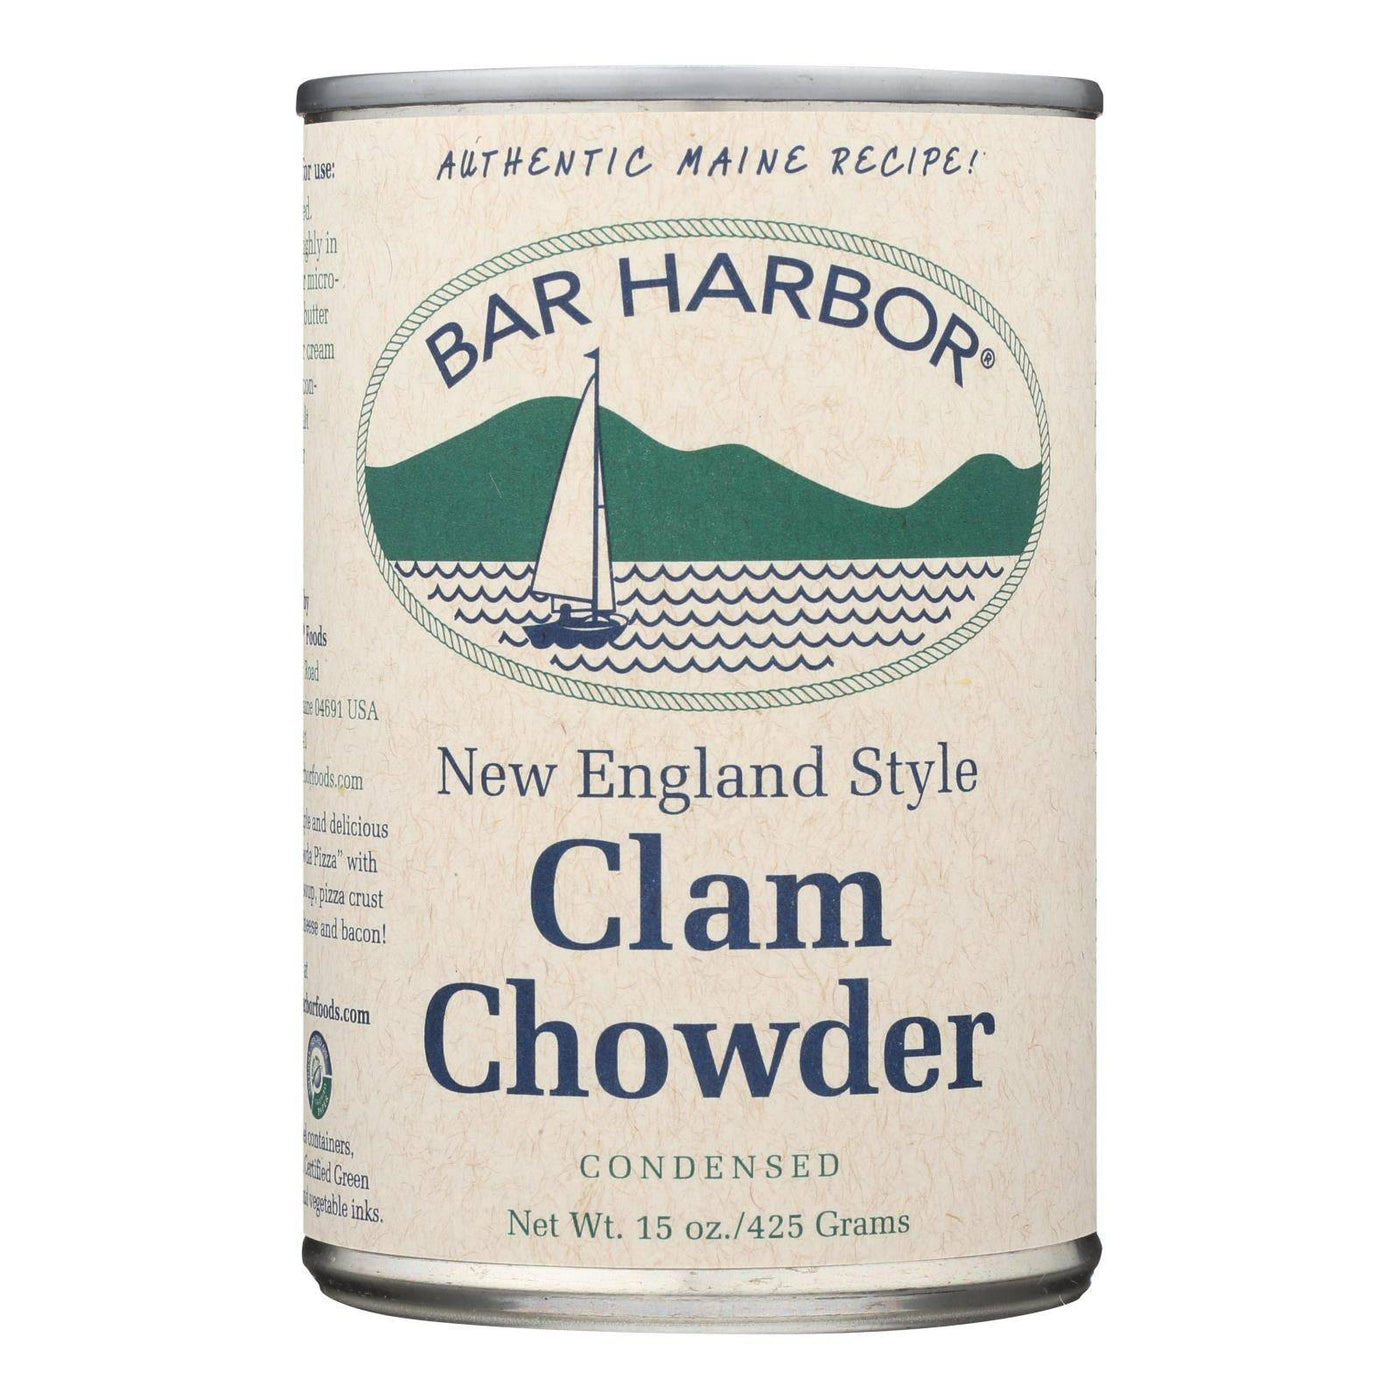 Buy Bar Harbor - All Natural New England Clam Chowder - Case Of 6 - 15 Oz.  at OnlyNaturals.us